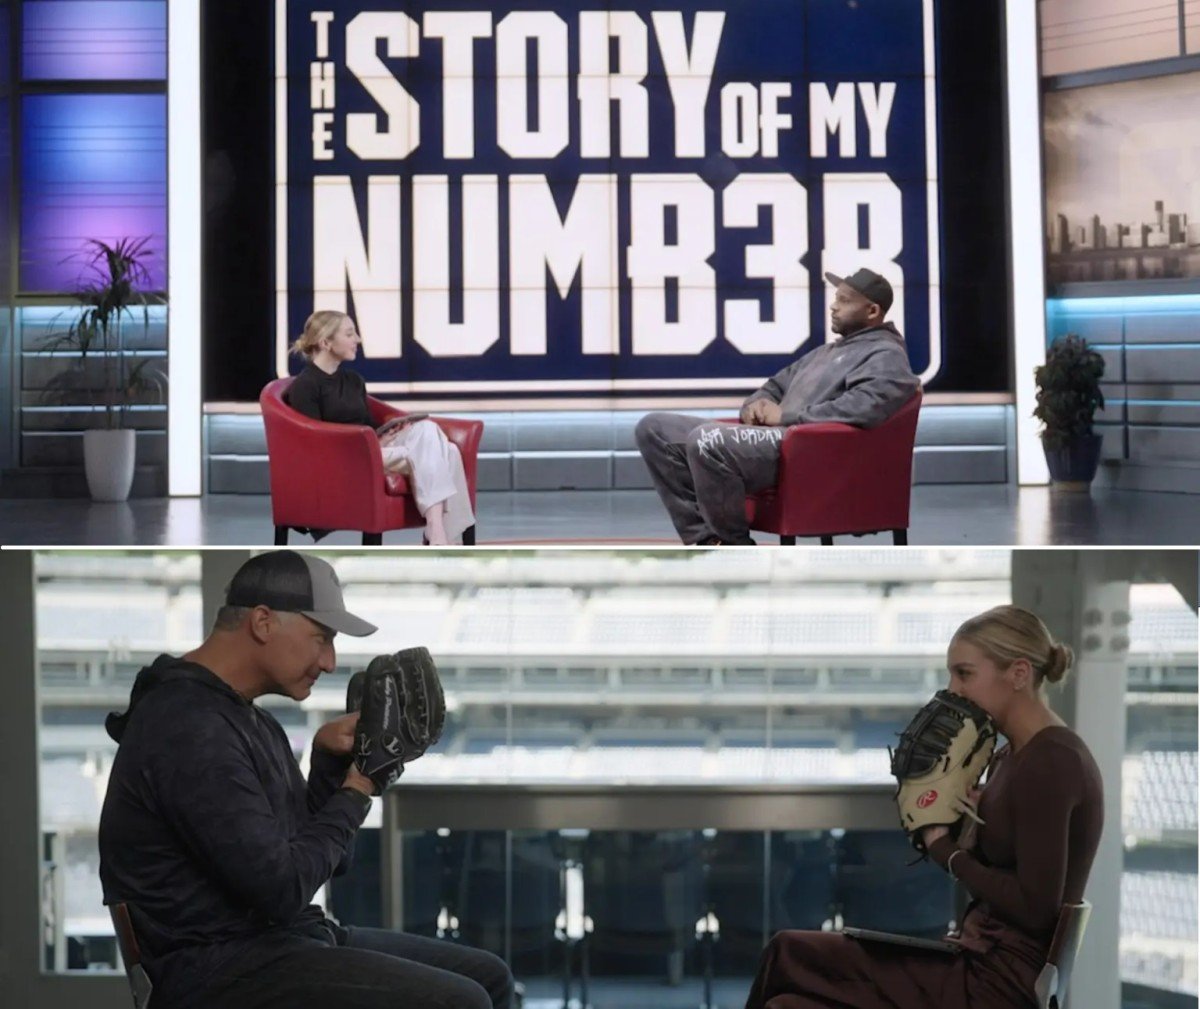 Gracie Cashman interviews CC Sabathia and Andy Pettitte for the new YES App series on Yankees legends ‘The Story of My Number,' which is to debut on May 6, 2024.